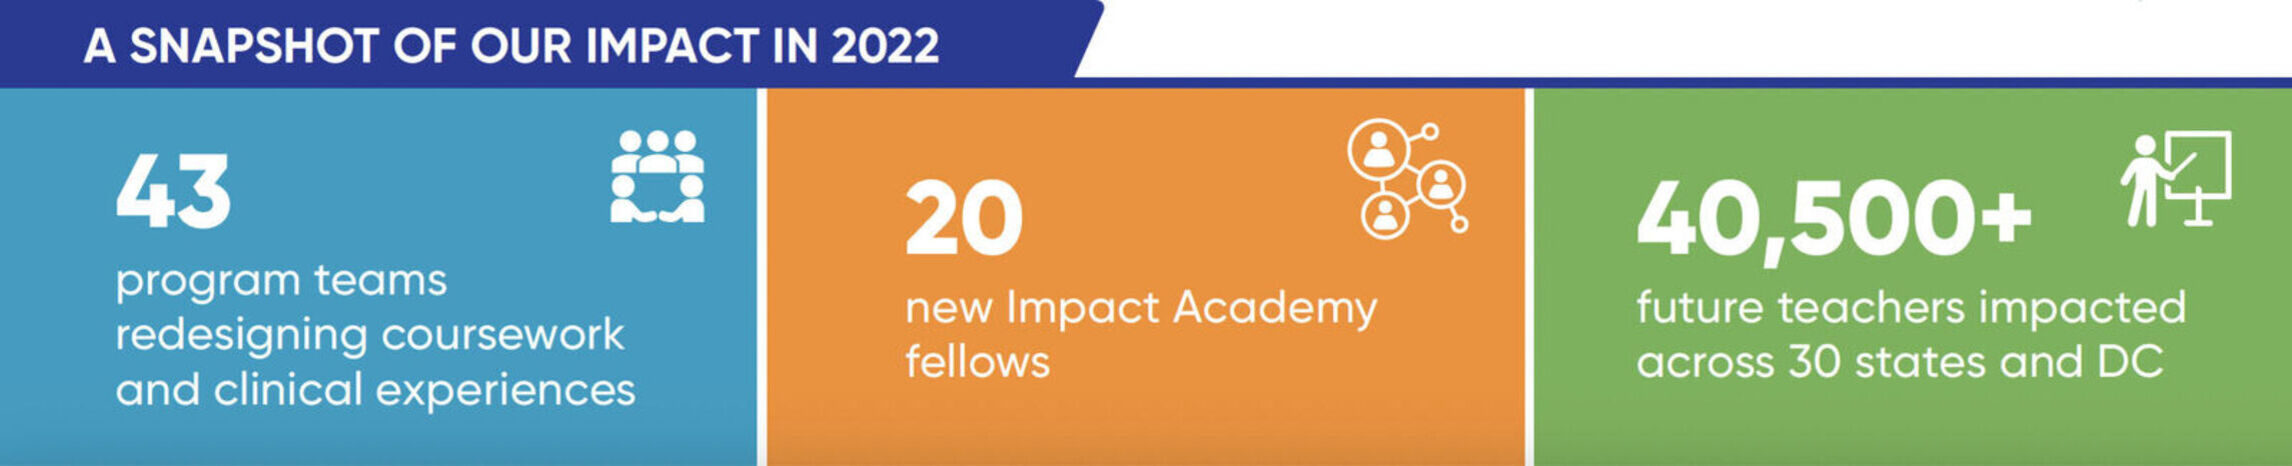 A snapshot of our impact in 2022